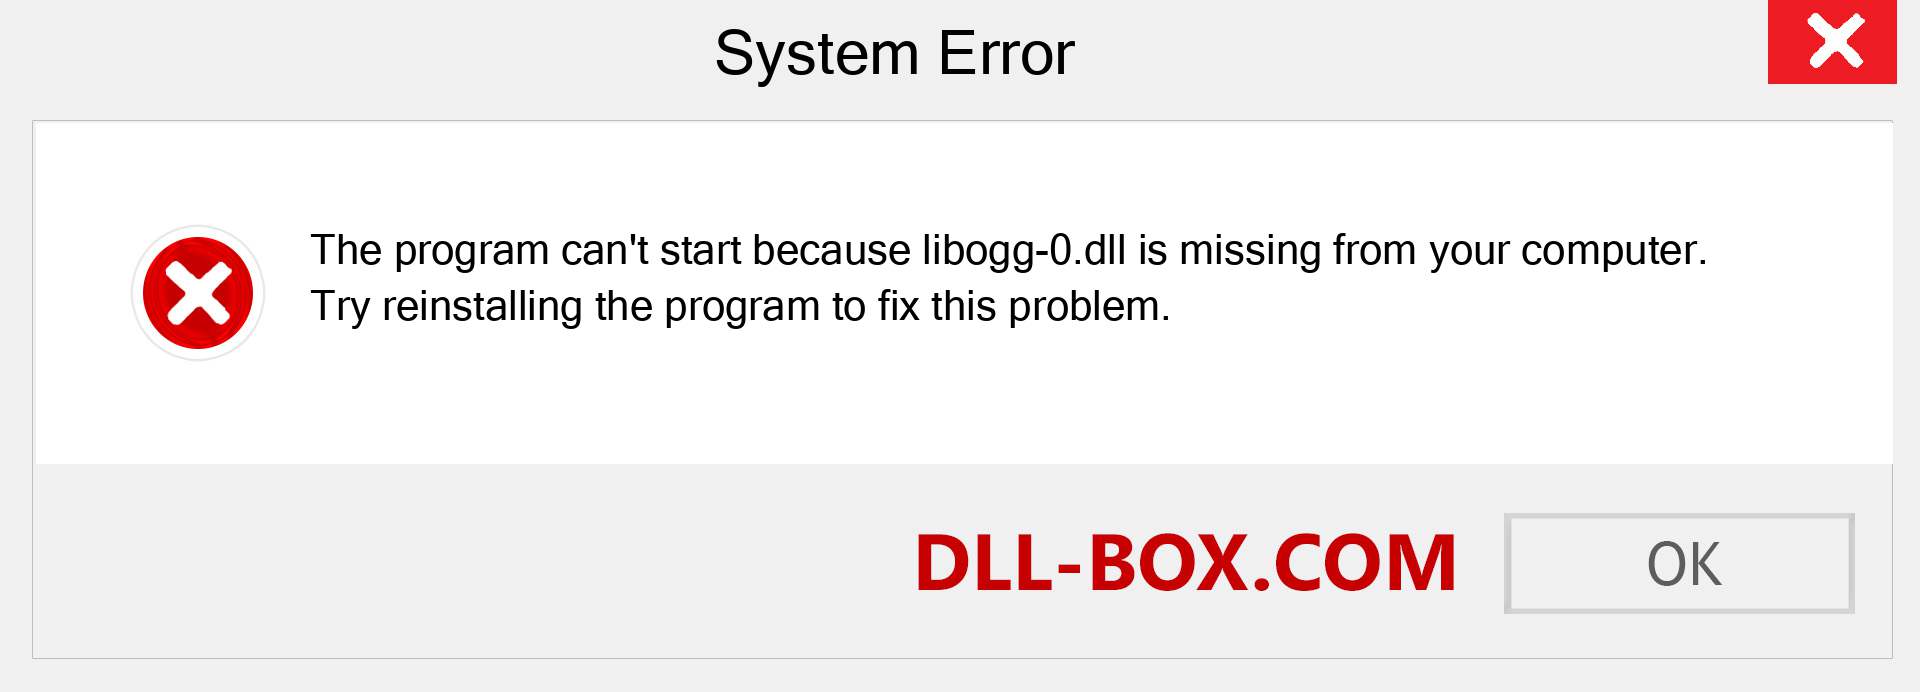  libogg-0.dll file is missing?. Download for Windows 7, 8, 10 - Fix  libogg-0 dll Missing Error on Windows, photos, images